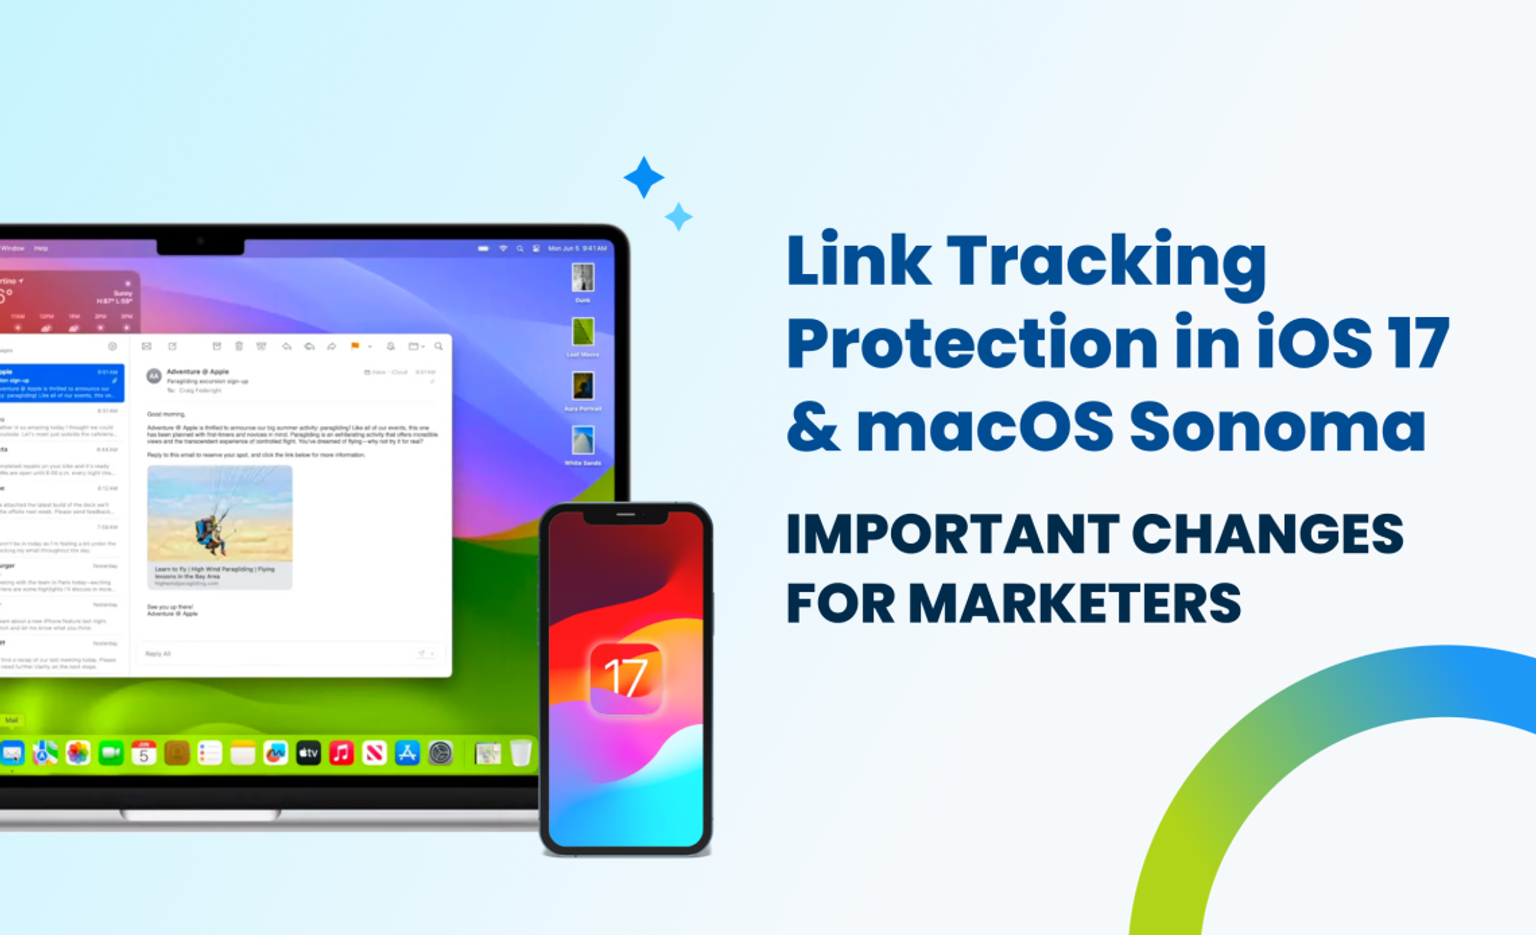 Link Tracking Protection in iOS 17 & macOS Sonoma